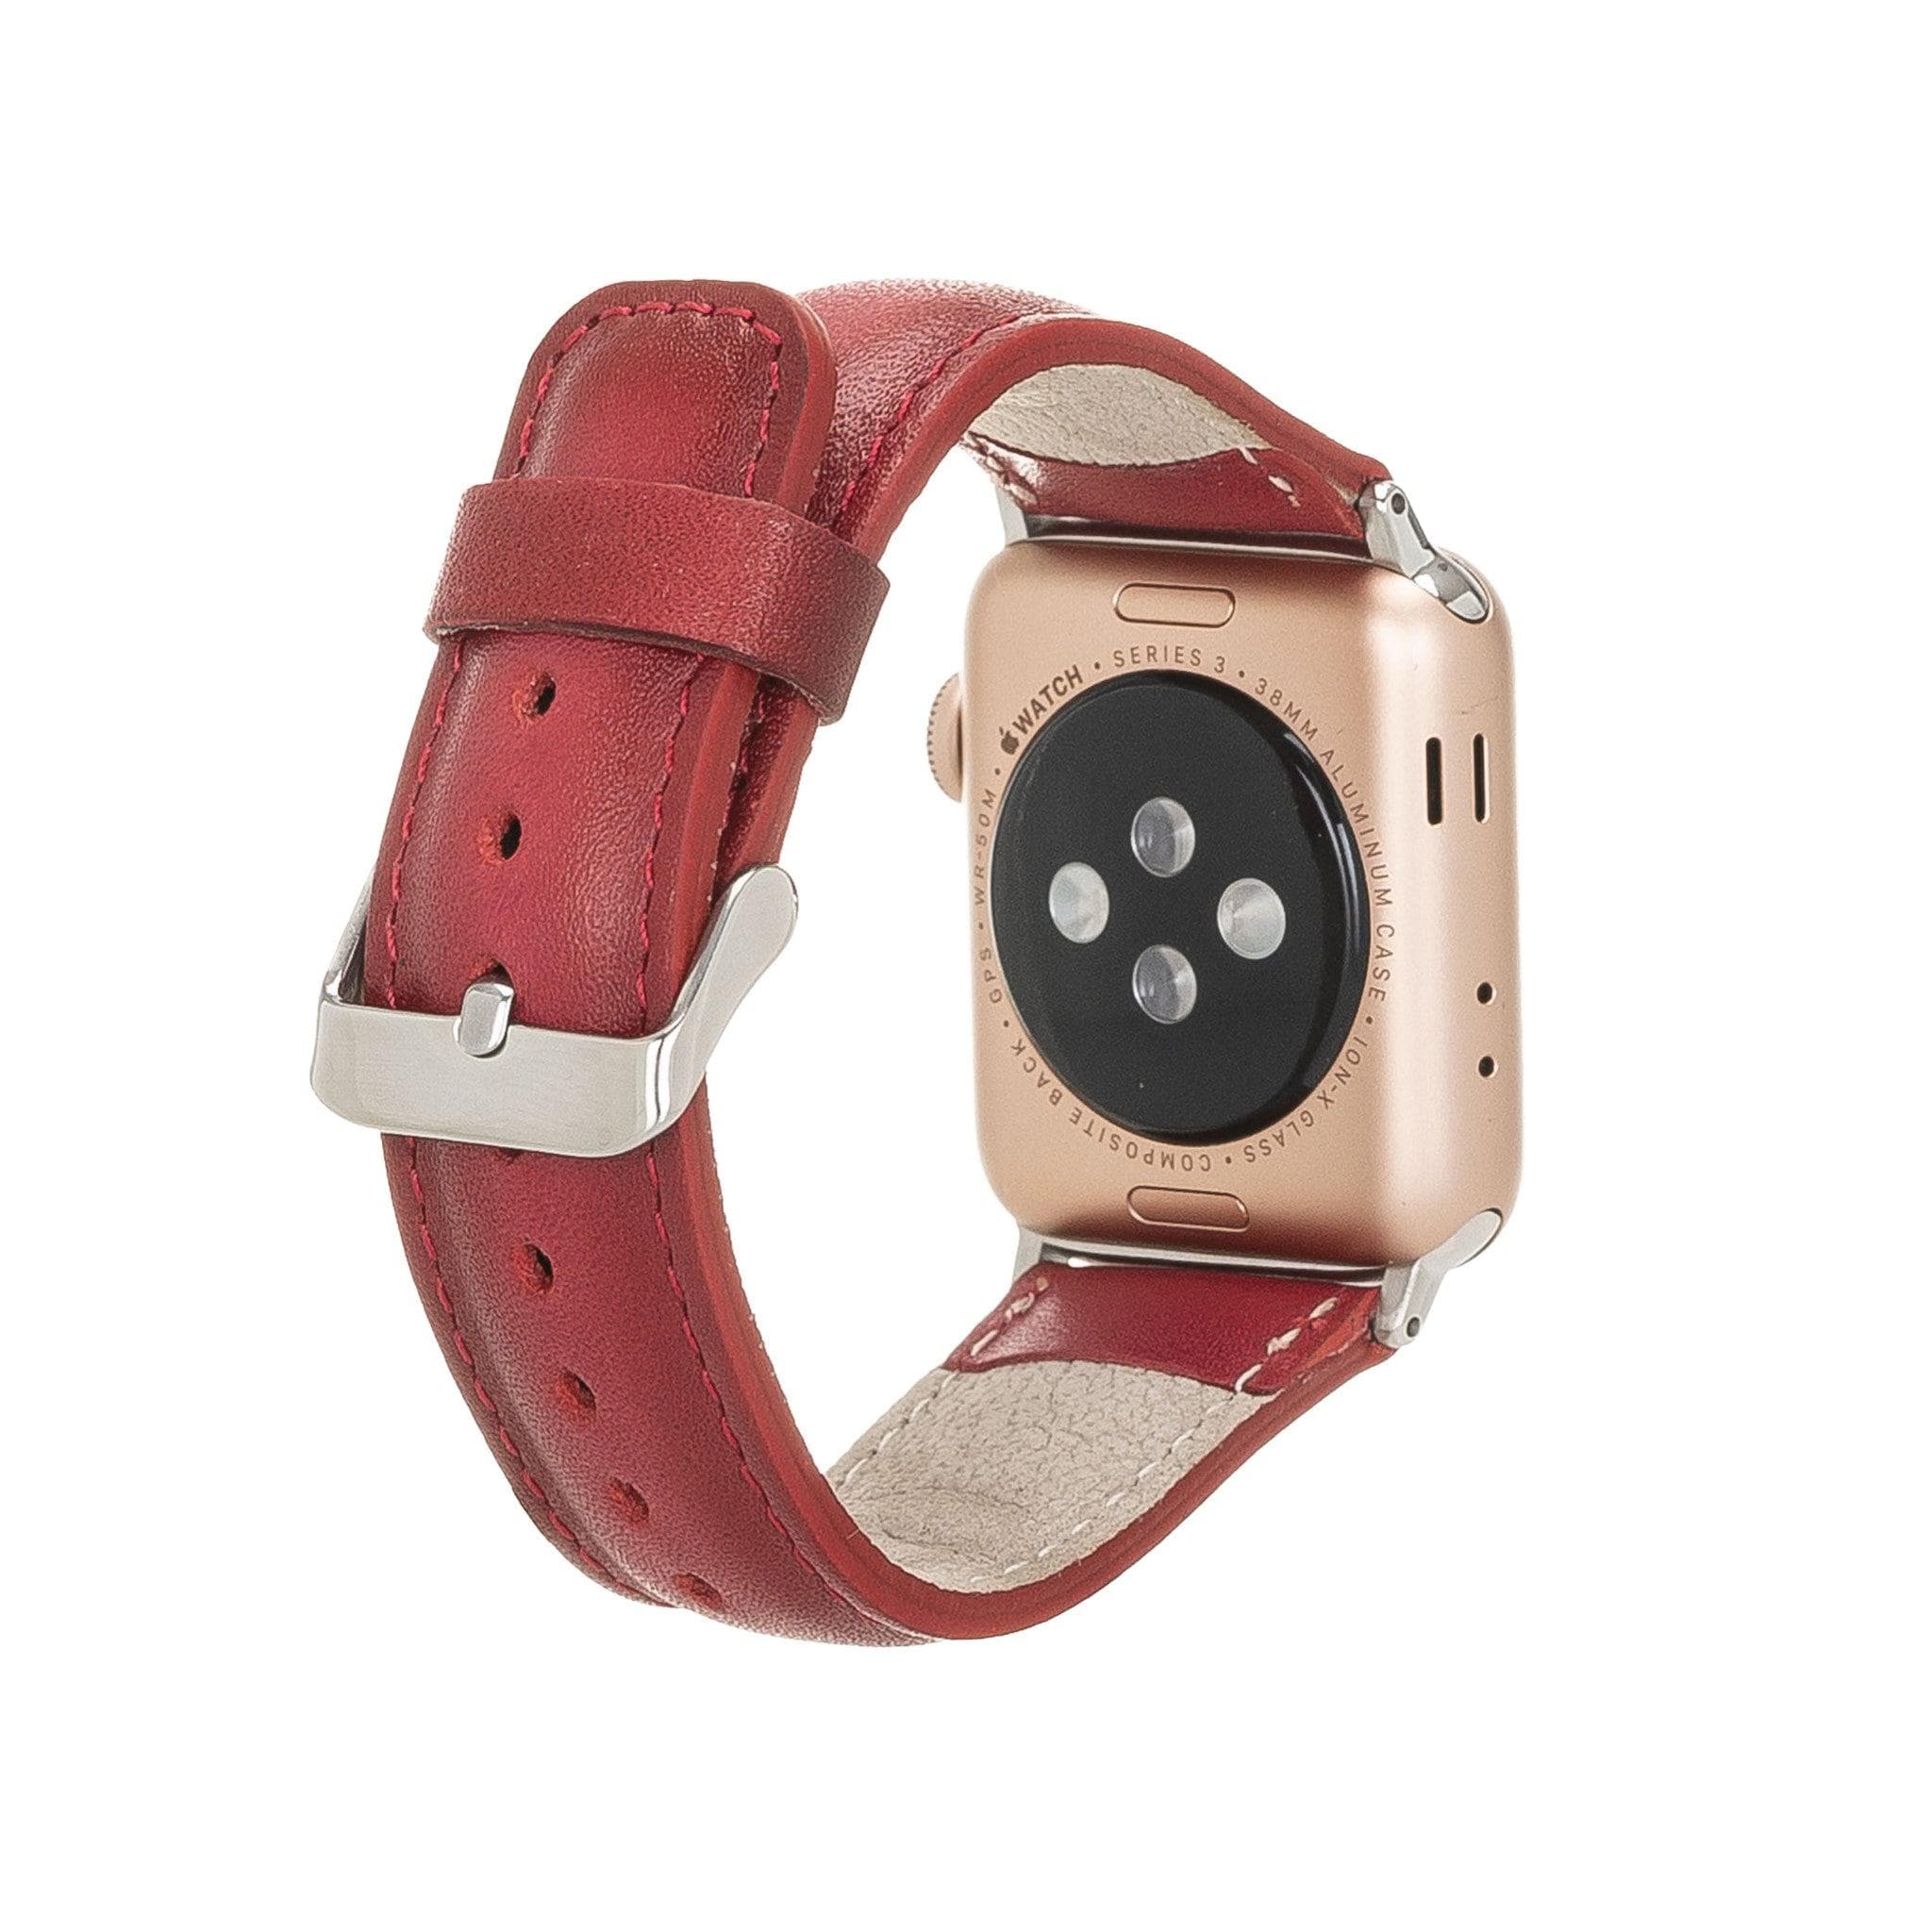 Bouletta Hereford Classic Colorful Apple Watch Leather Straps